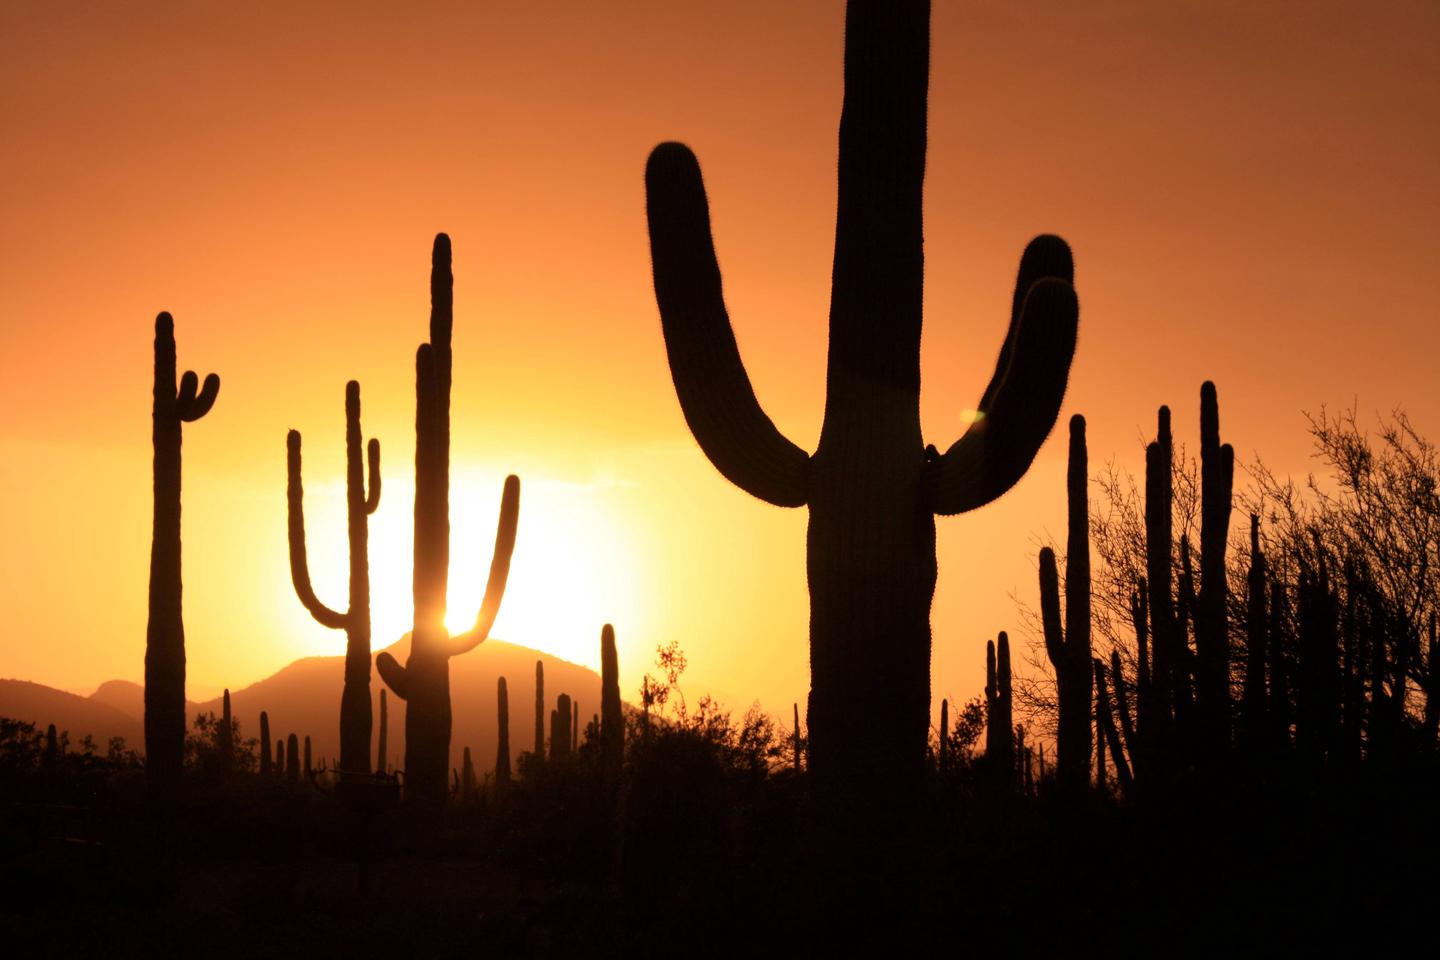 Saguaros at sunset.The saguaros are sad to see you go when the day ends, so stay around awhile!